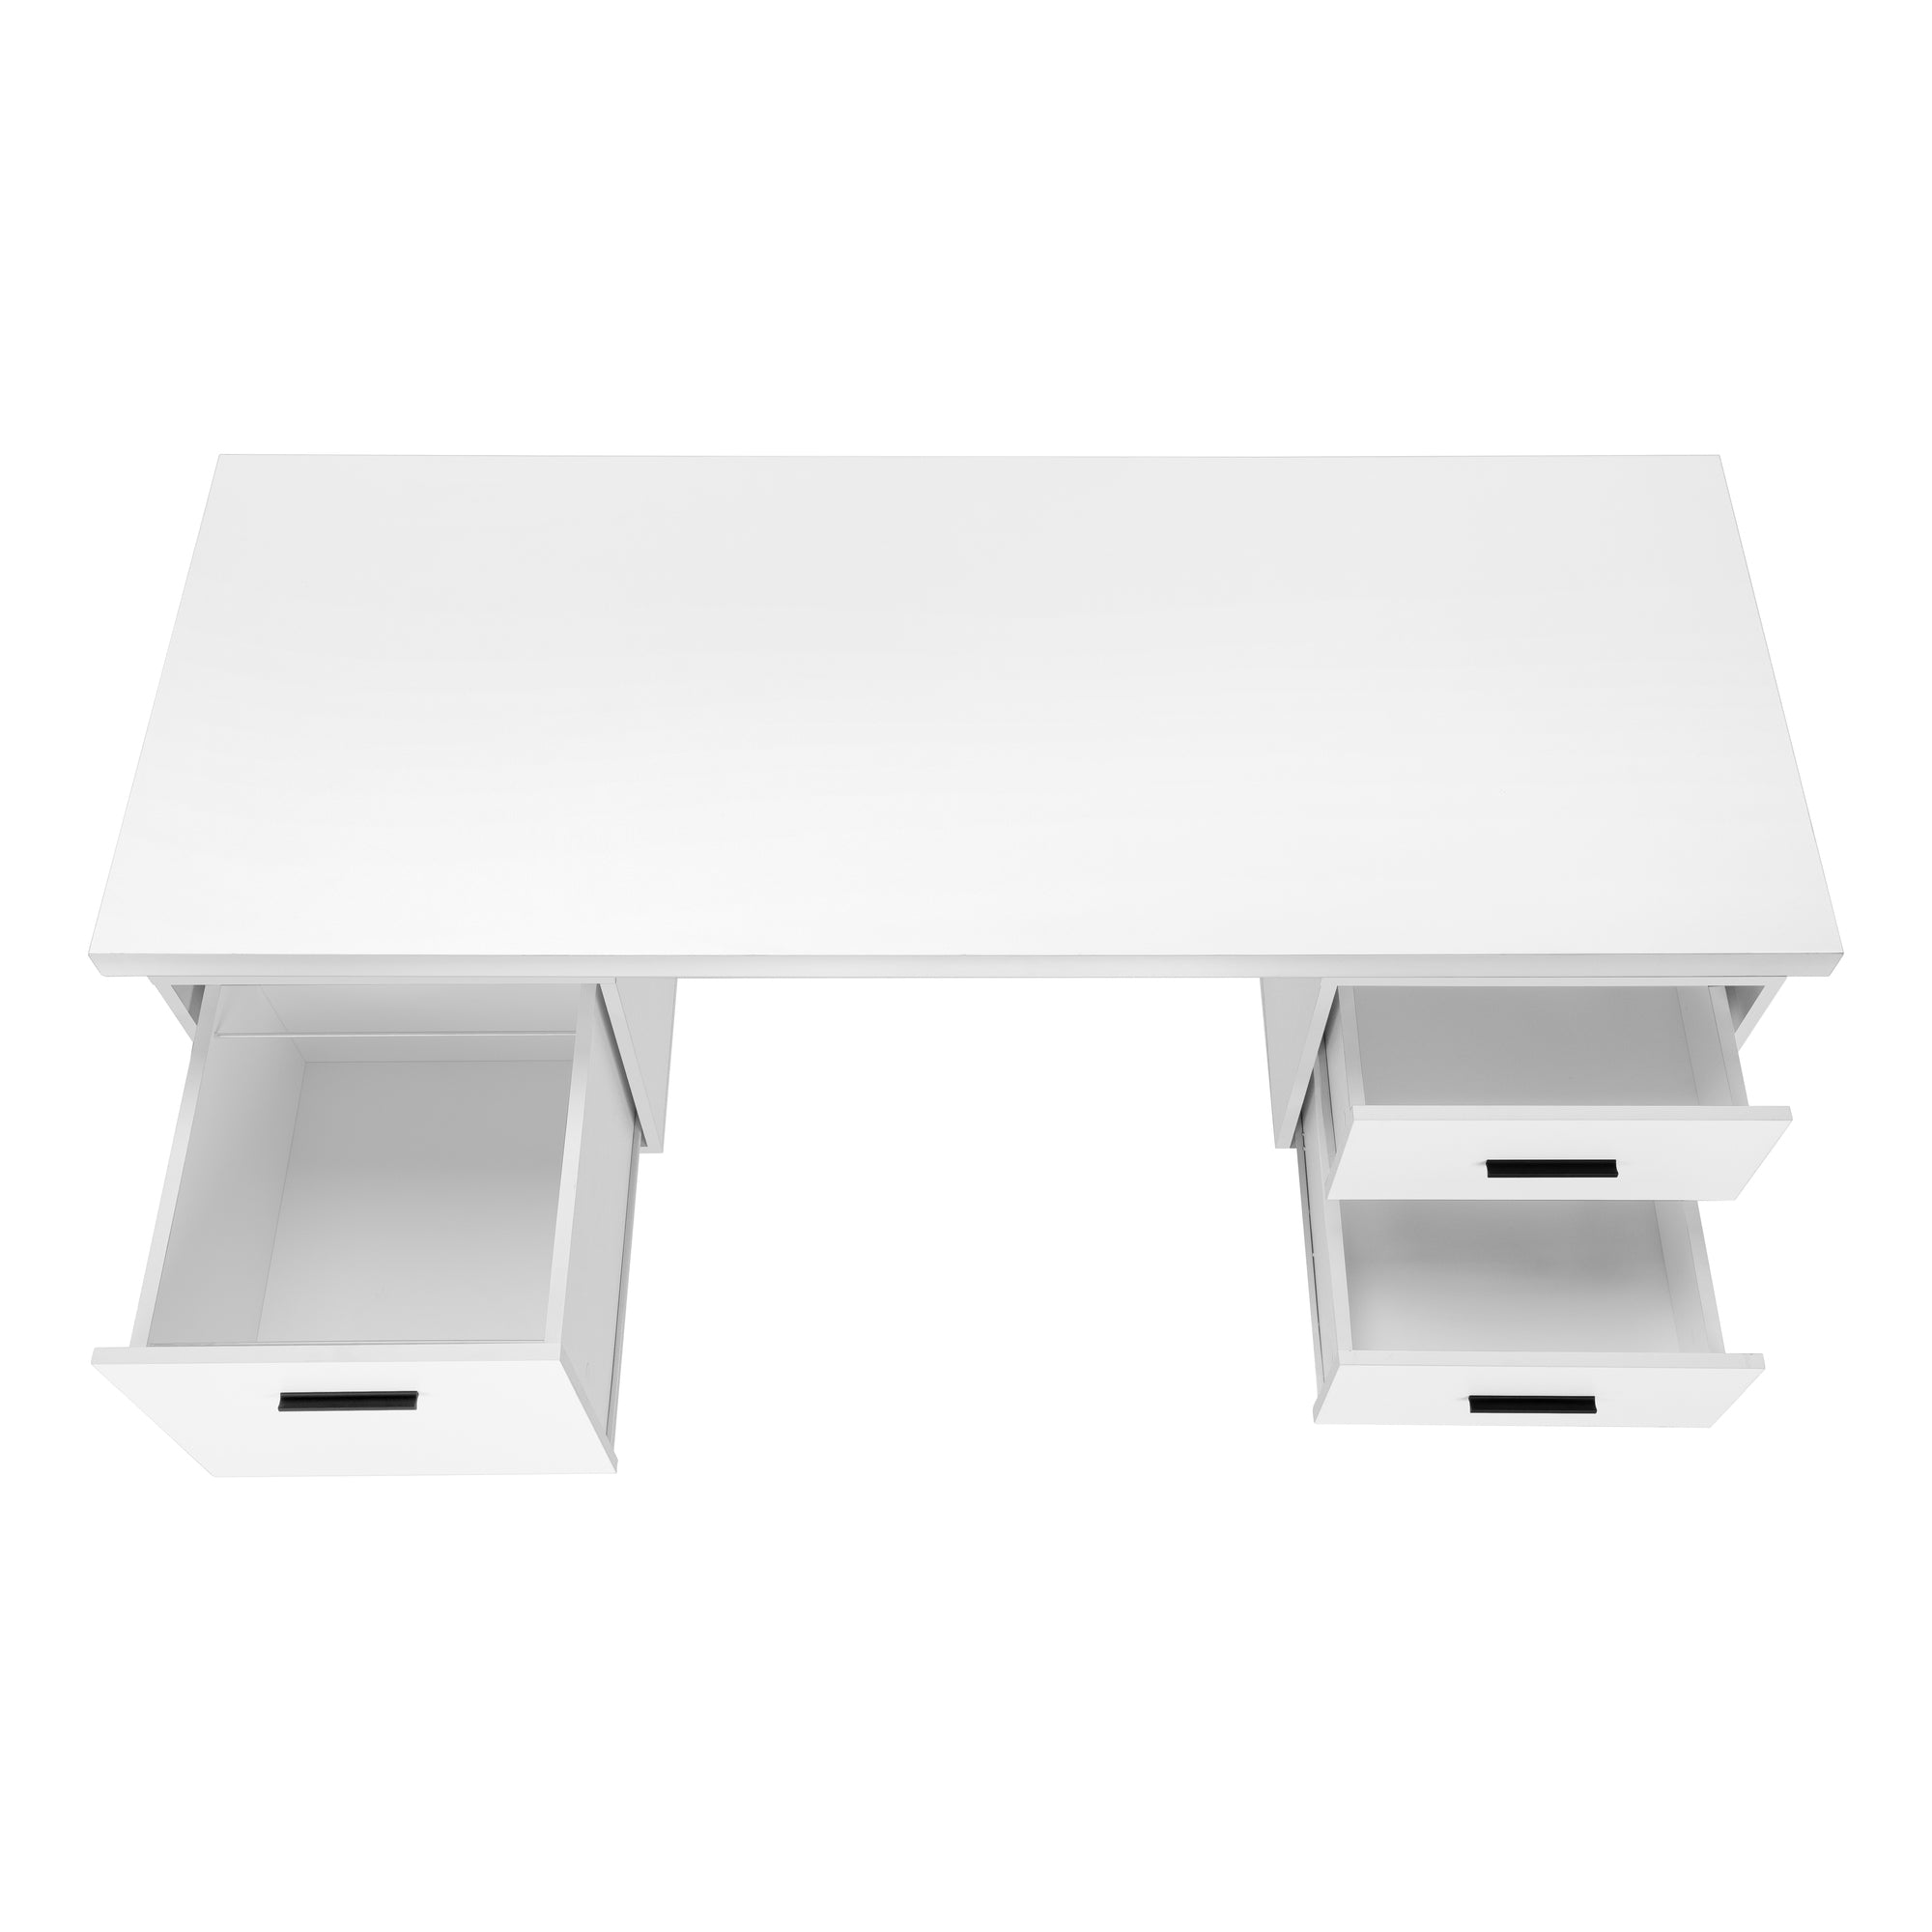 MN-427631    Computer Desk, Home Office, Laptop, Left, Right Set-Up, Storage Drawers, 60"L, Metal, Laminate, White, Black, Contemporary, Modern